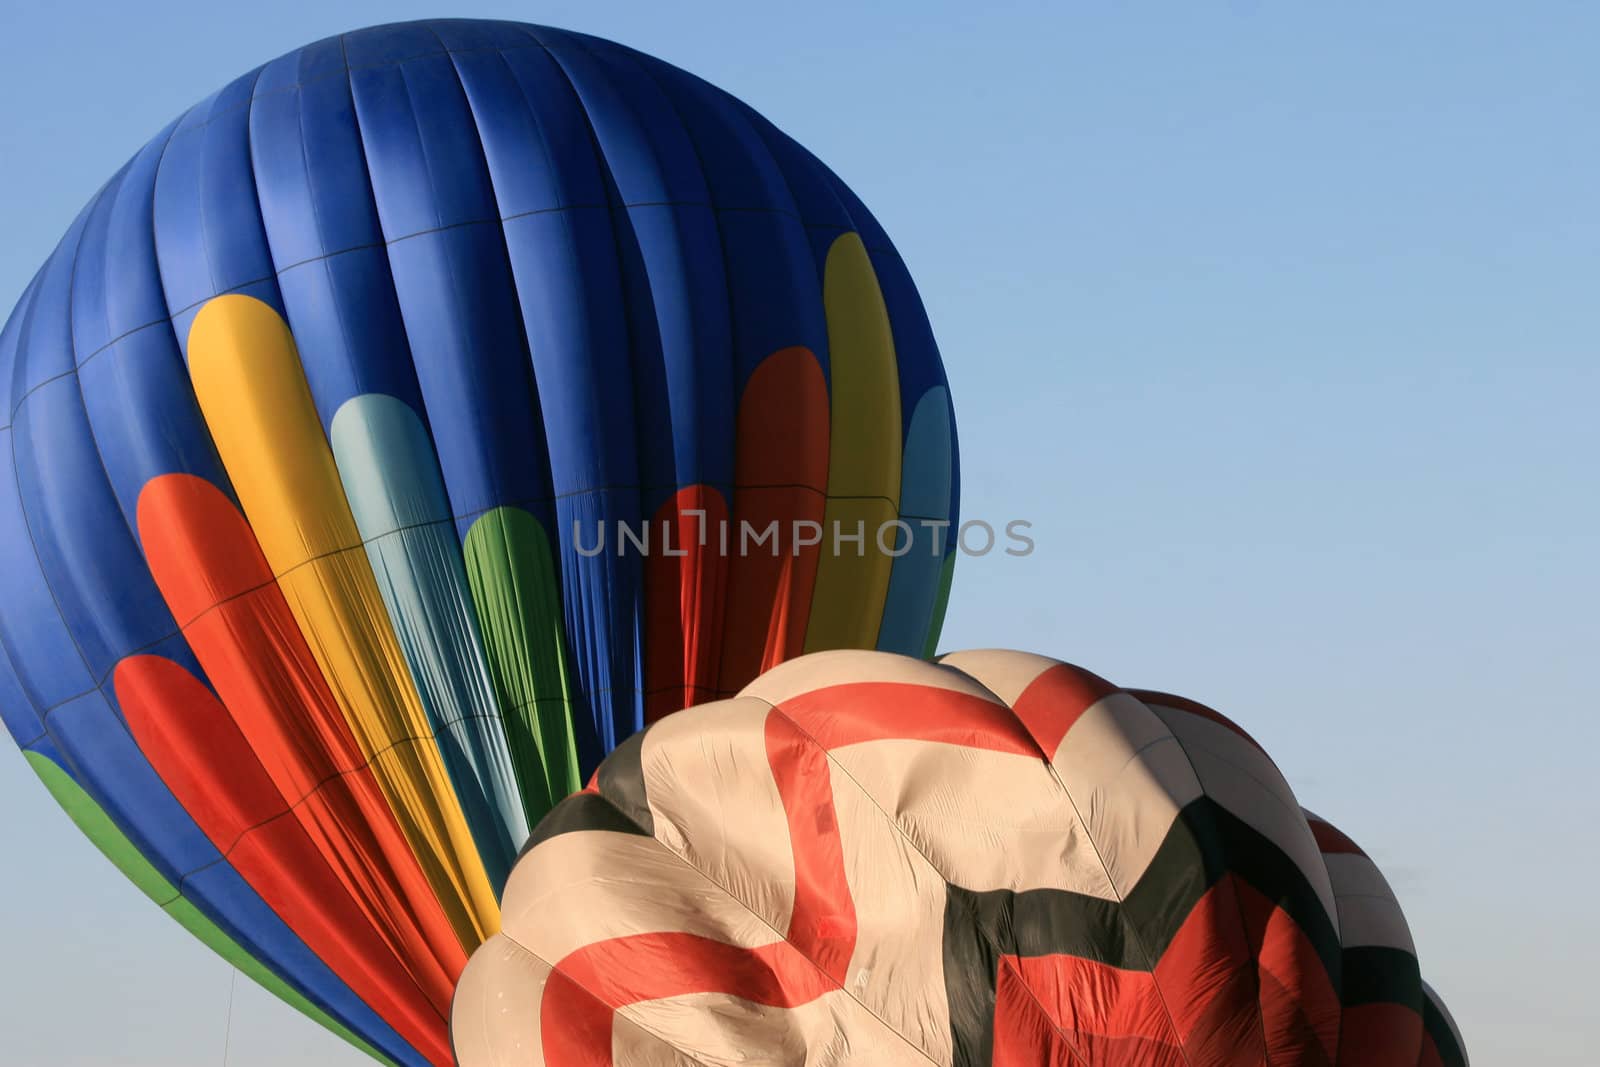 Colorful hot-air balloons inflate against a beautiful bright blue sky